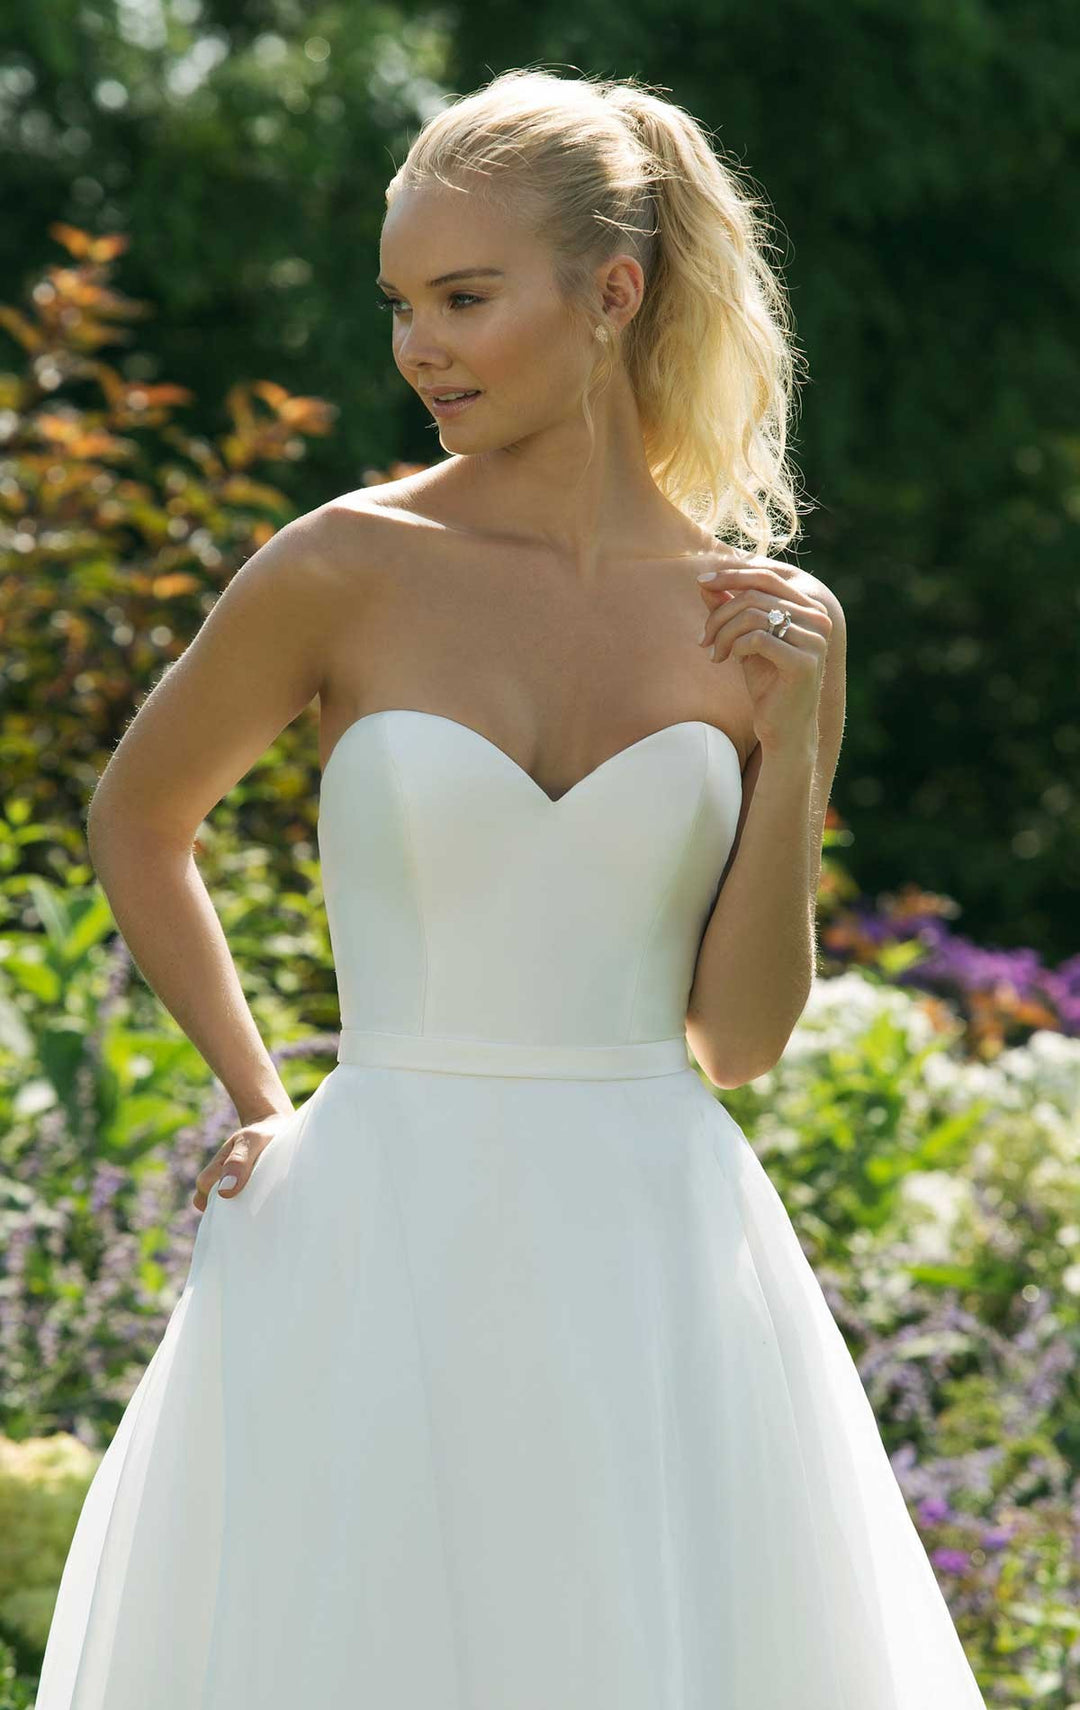 Sweetheart Bridal Gown Style 11005 Size 22